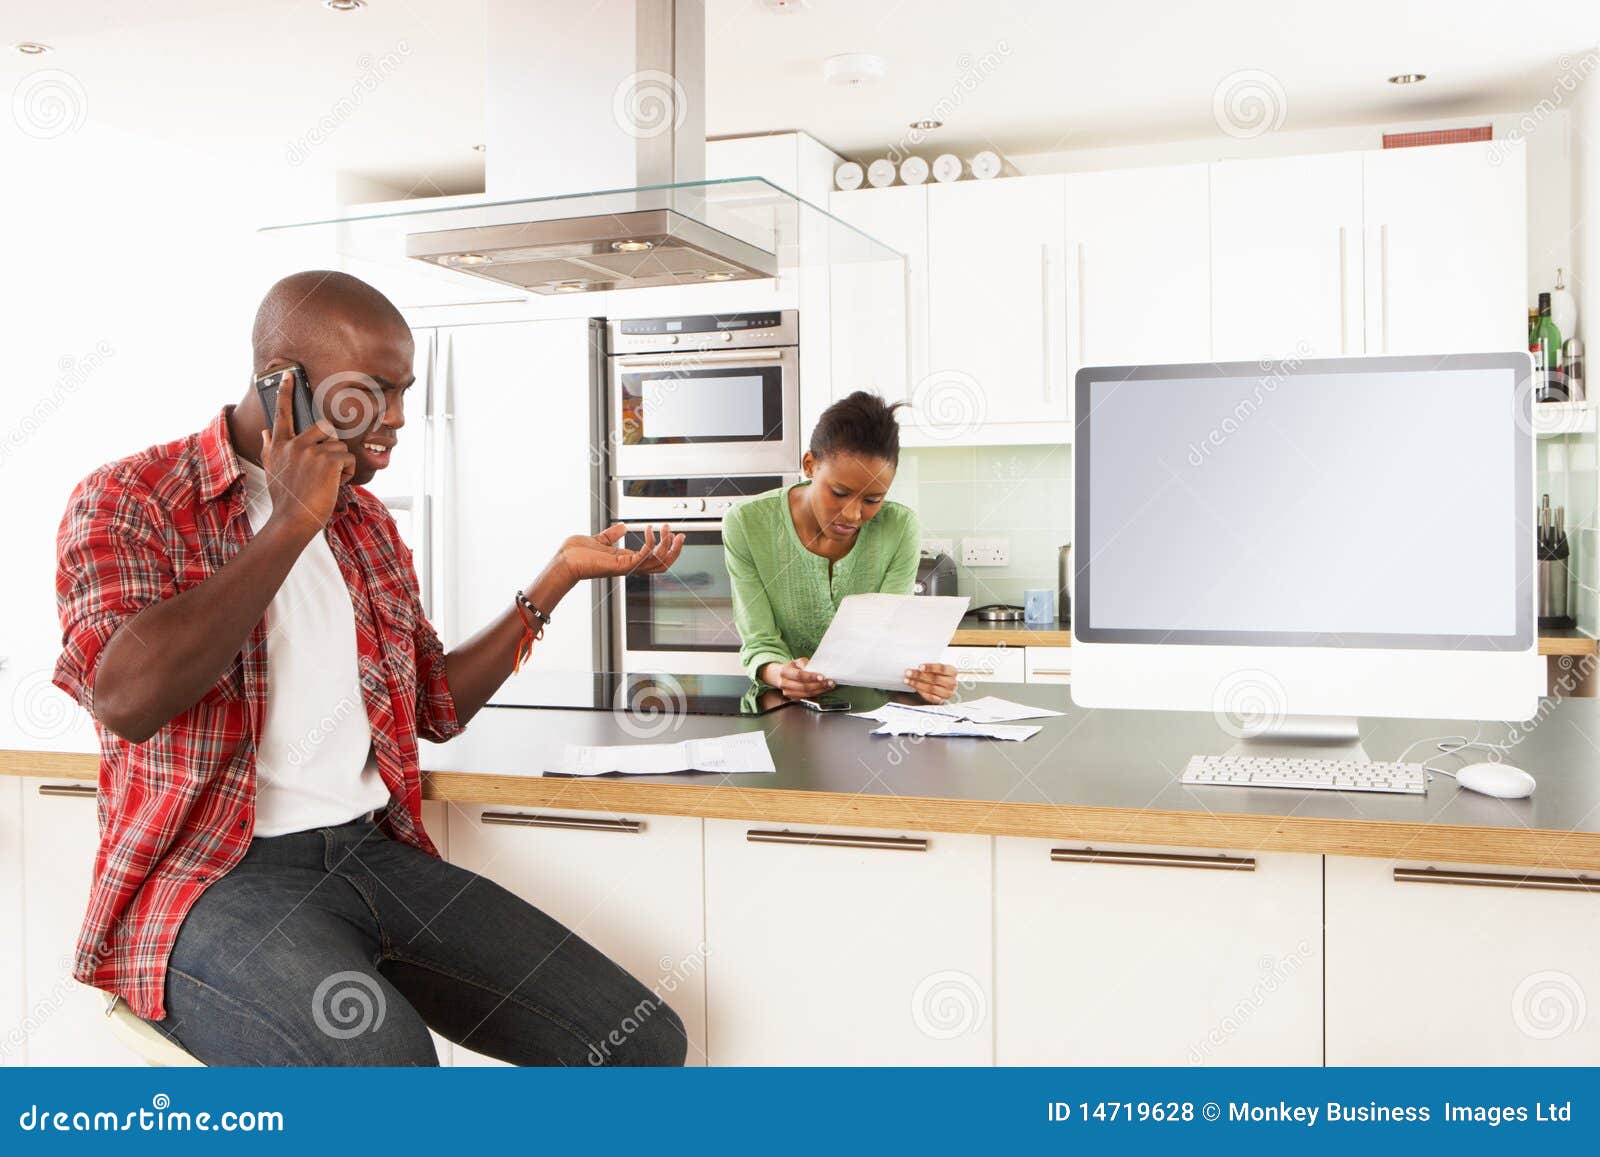  A couple is sitting in their kitchen discussing finances, the man is on the phone and the woman is looking at bills.